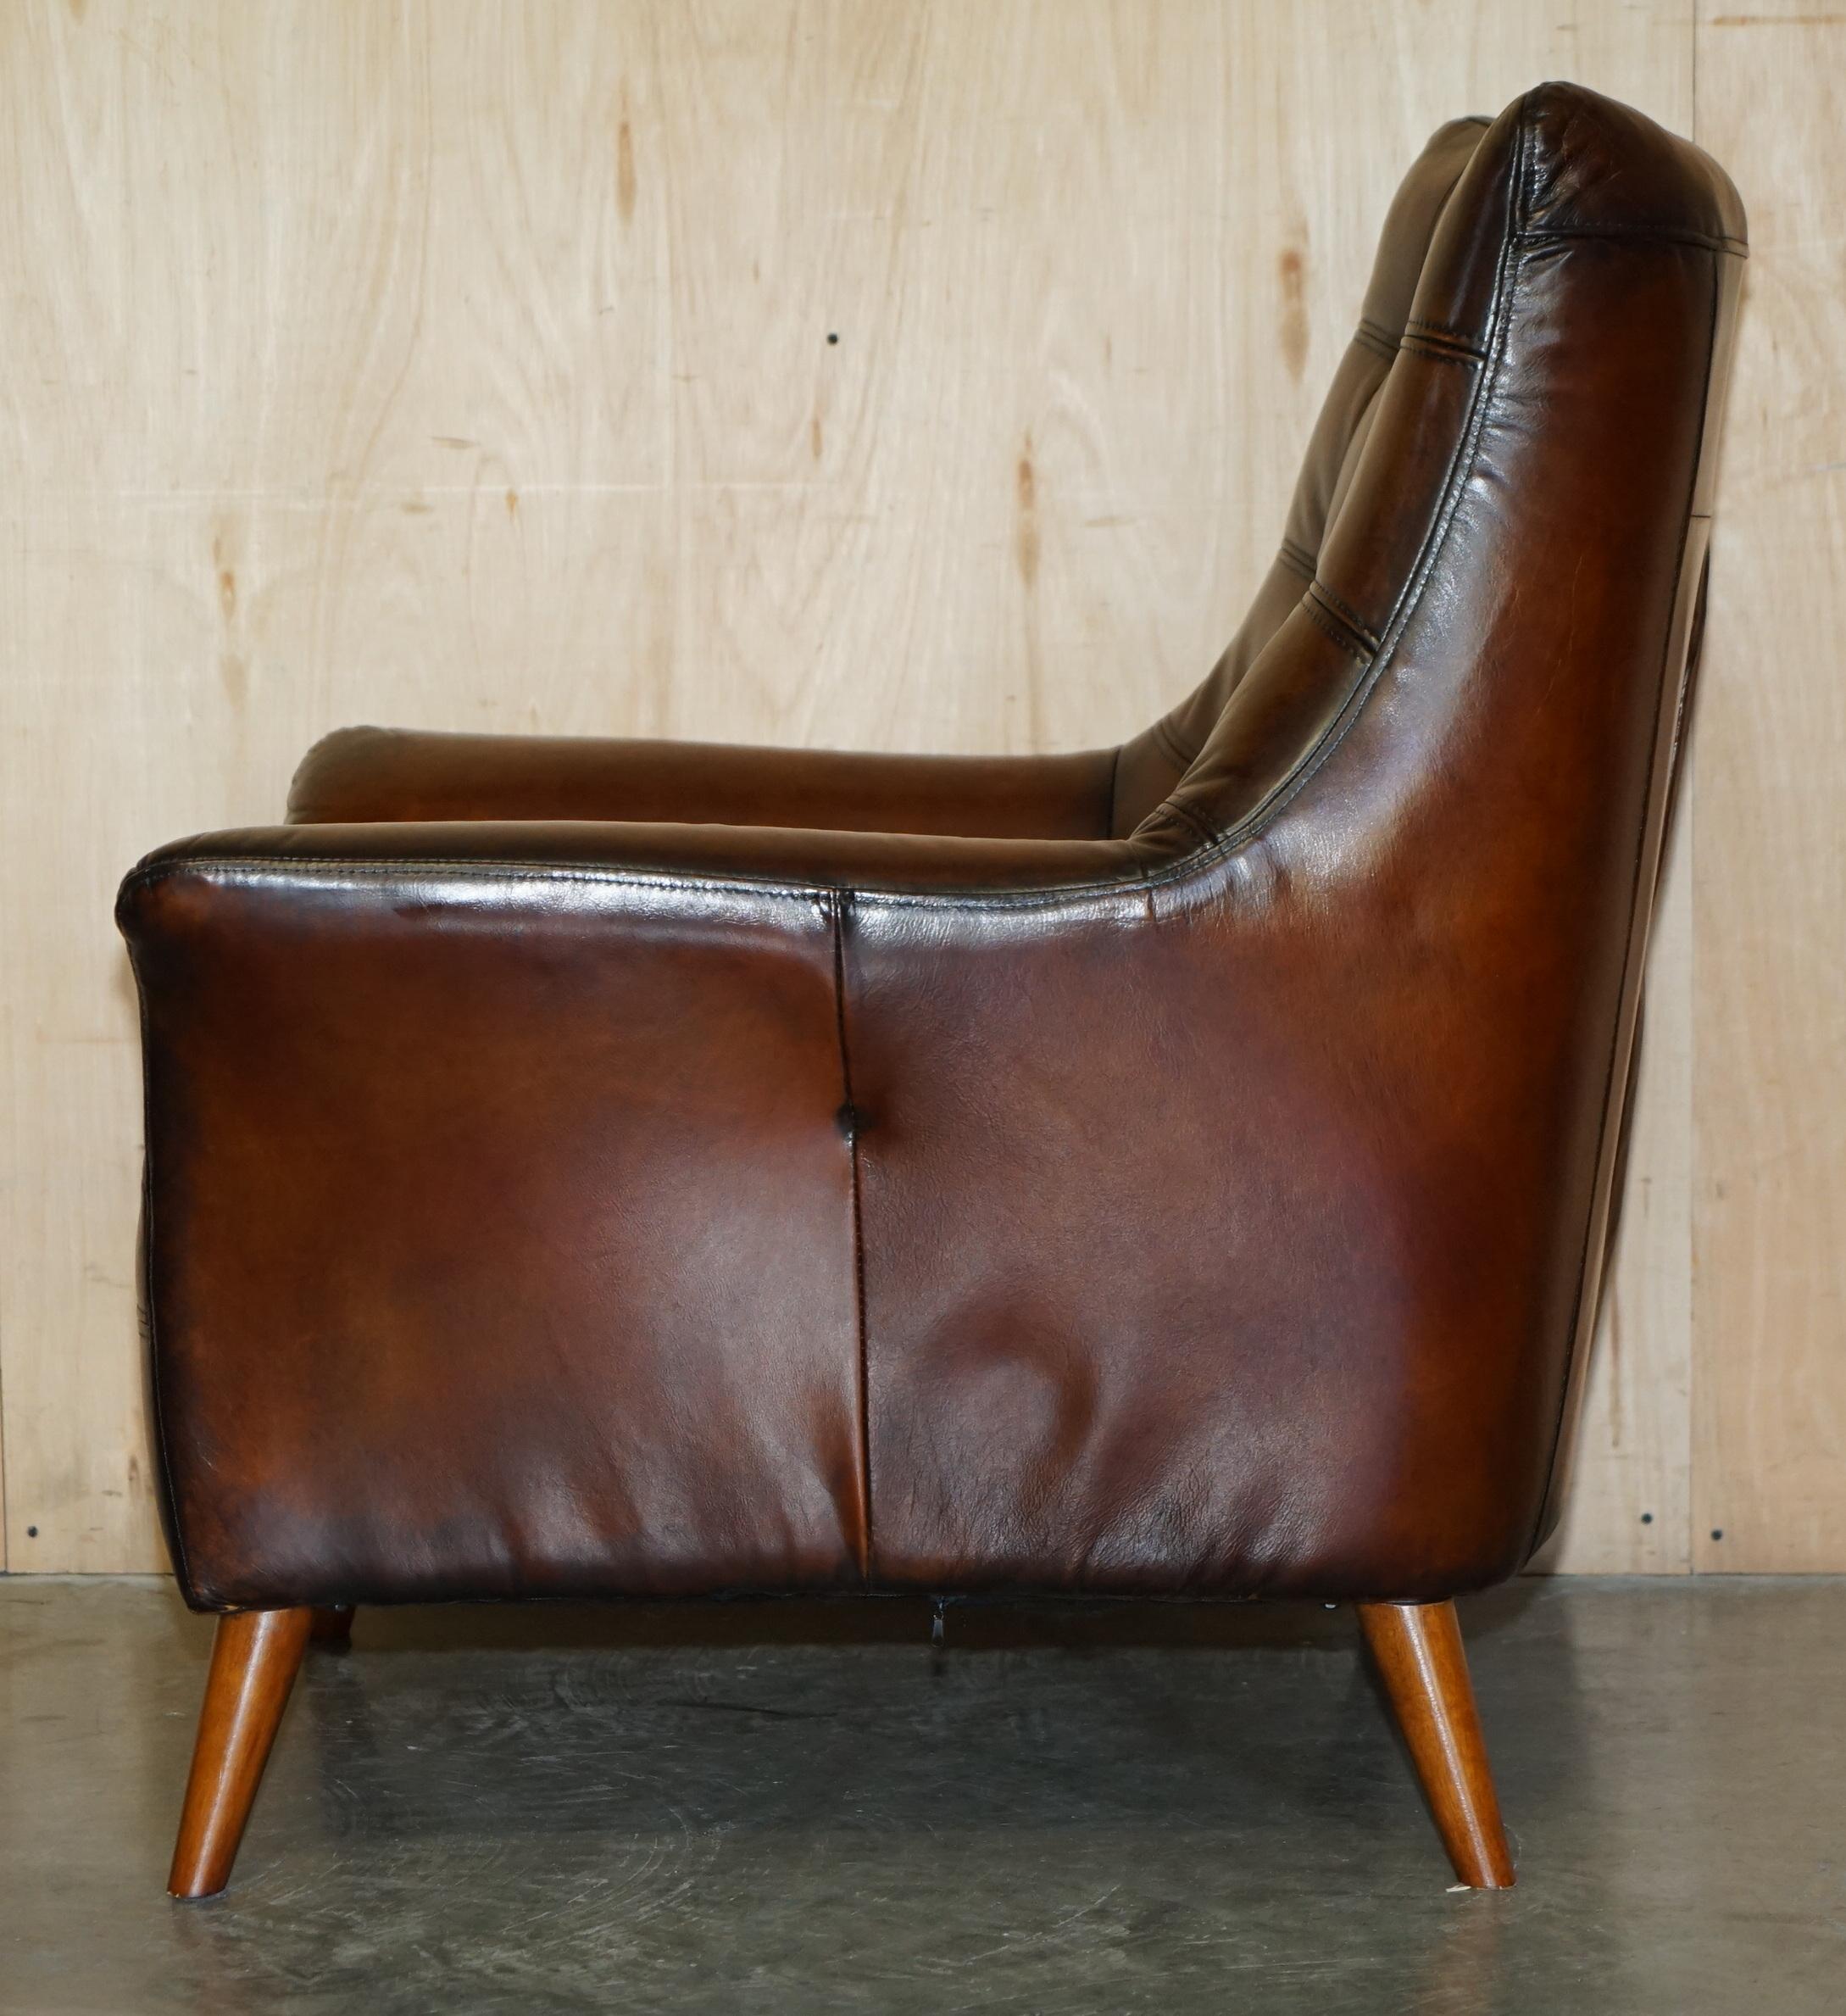 PAIR OF FULLY RESTORED HAND DYED CHESTERFiELD WHISKY BROWN LEATHER ARMCHAIRS For Sale 5